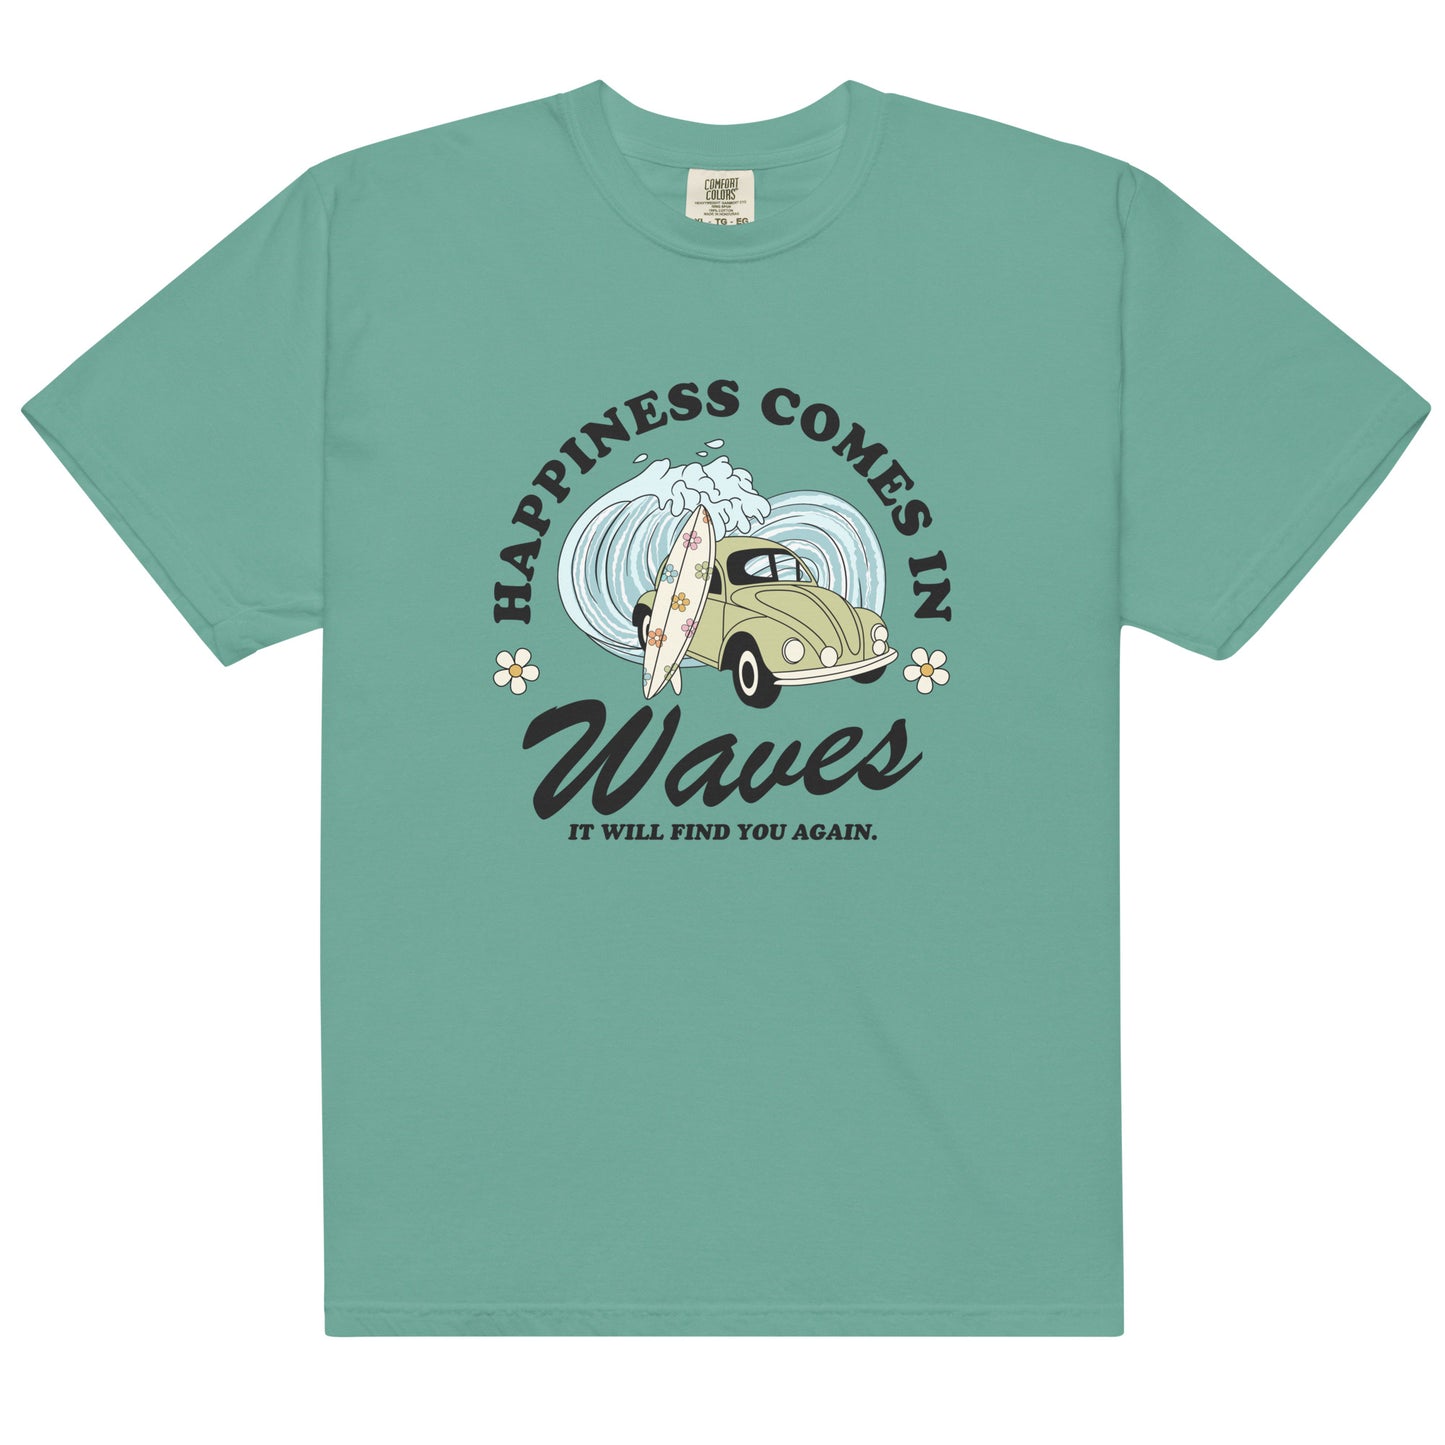 Happiness Comes in Waves Shirt